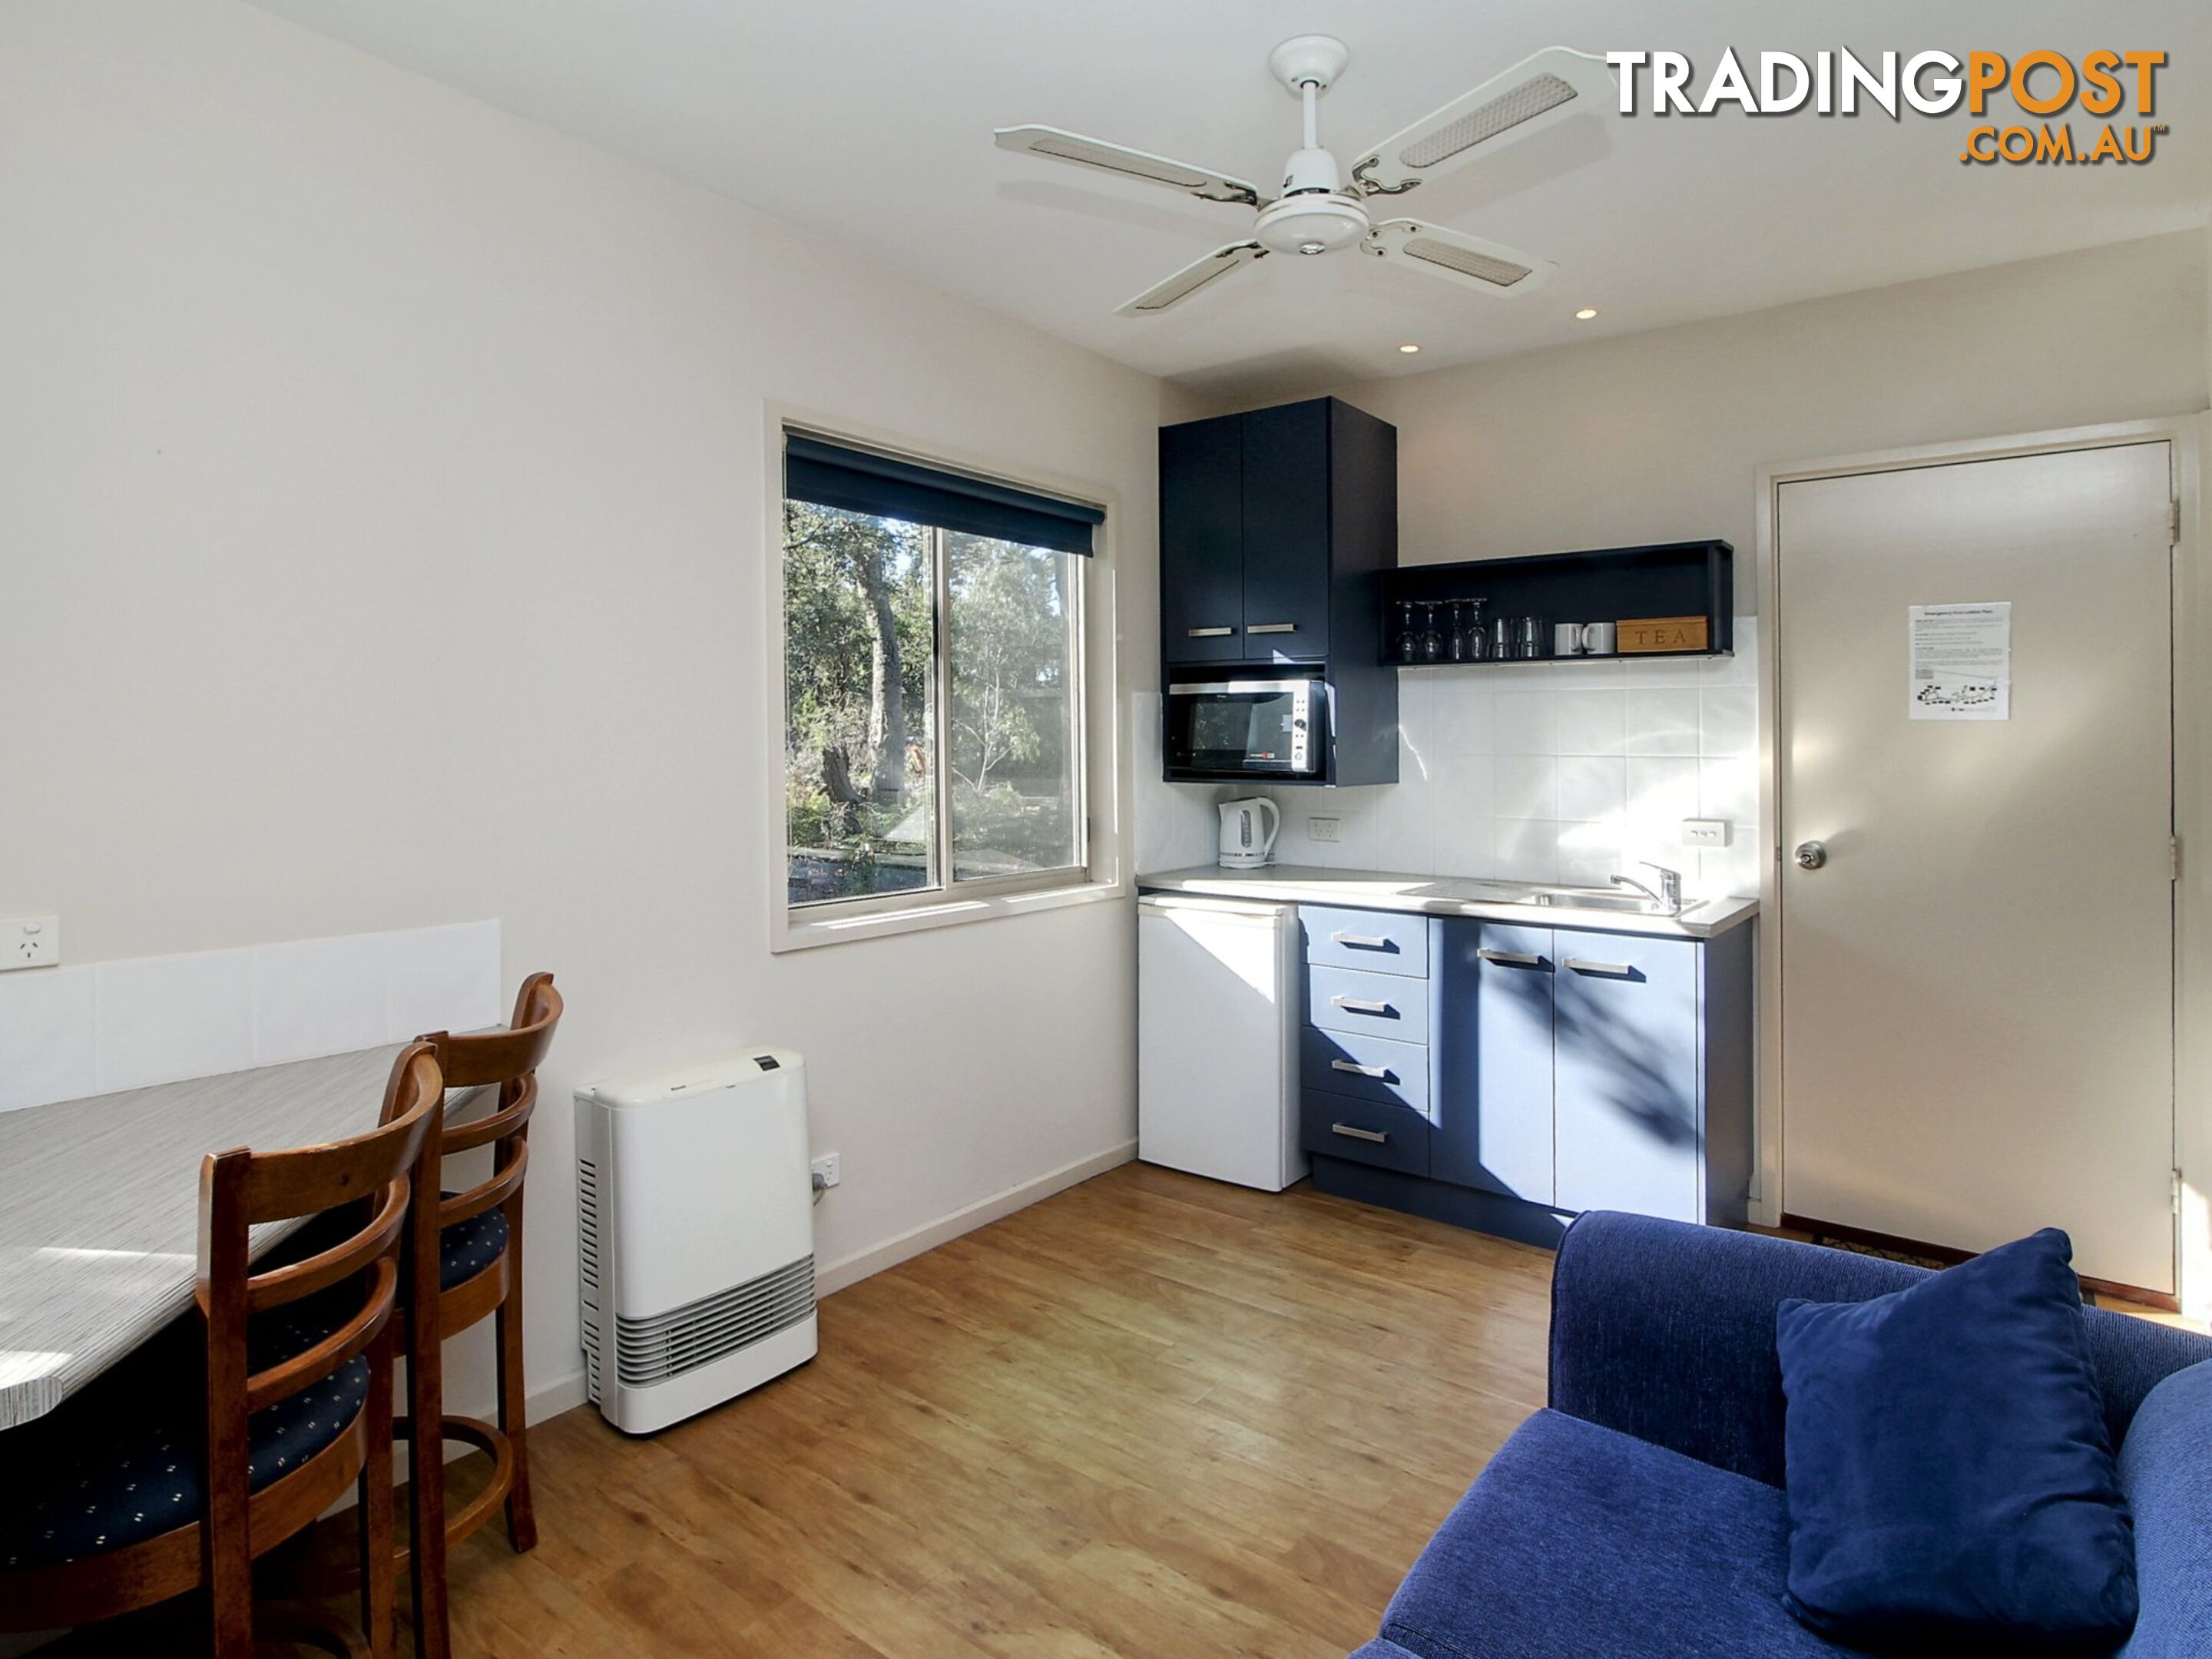 Unit 13/200 Wattle point Road FORGE CREEK, VIC 3875